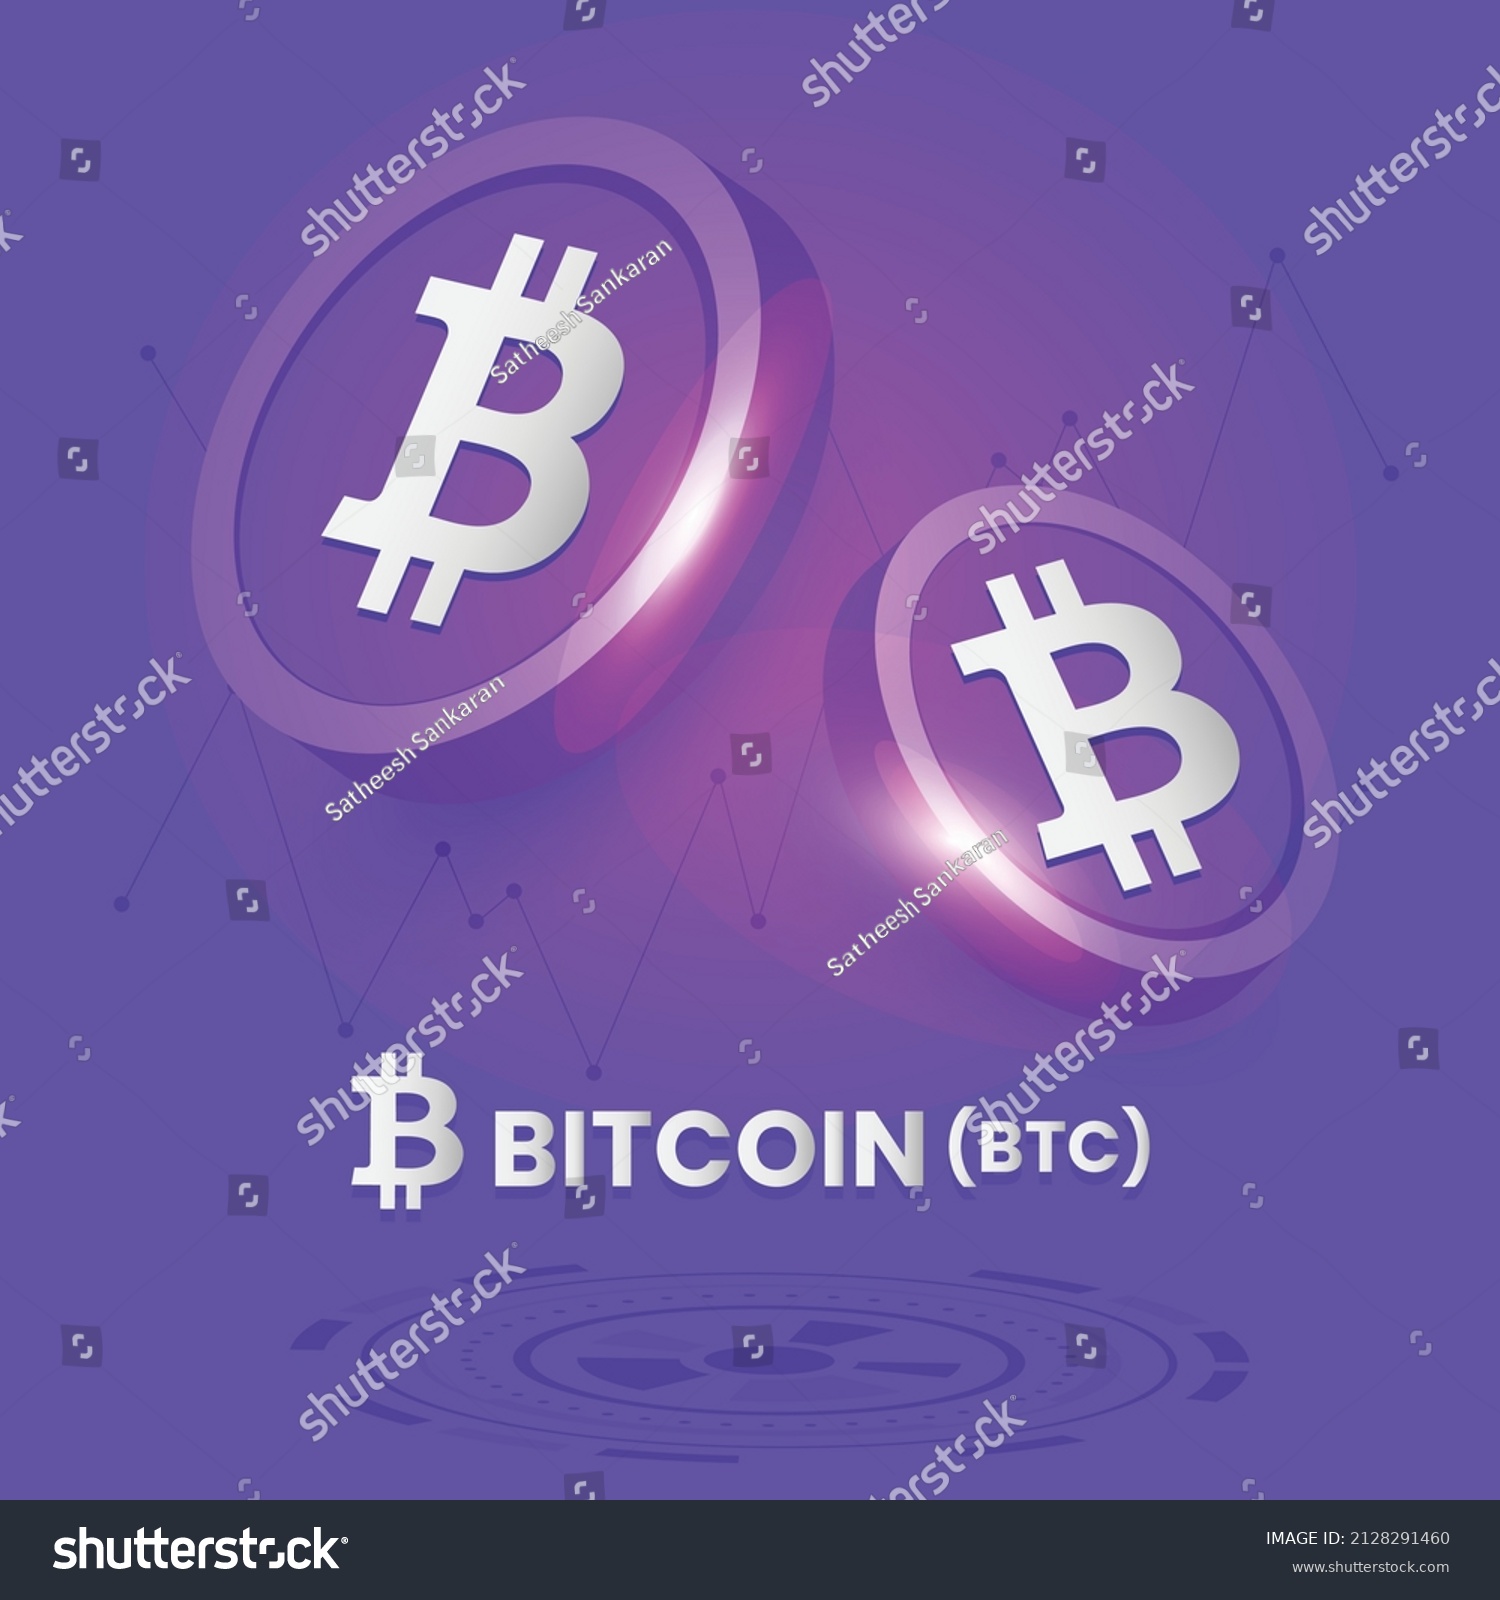 SVG of Bitcoin BTC cryptocurrency coins on a futuristic technology background vector template for poster, banner and social media post designs svg